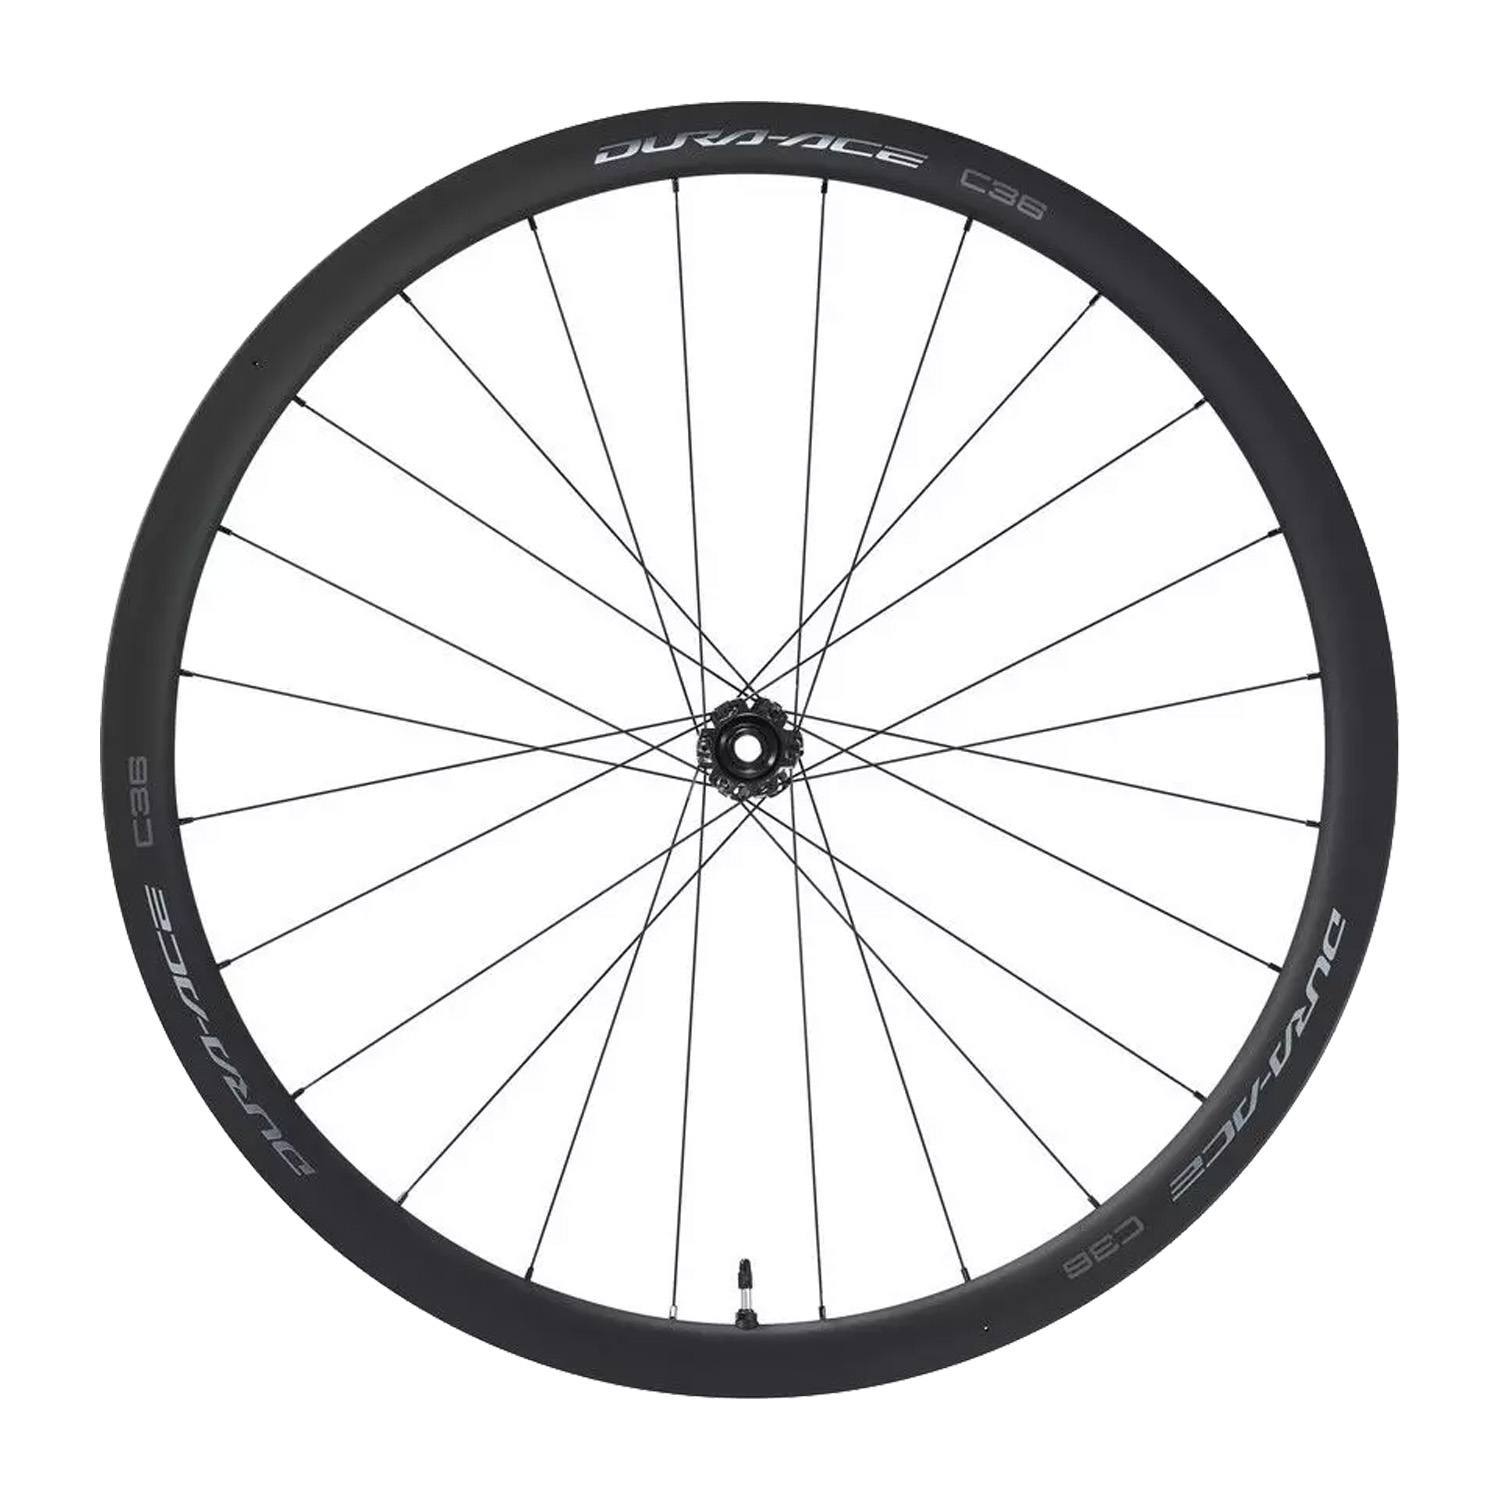 Shimano Dura-Ace WH-R9270 C36 TL disc